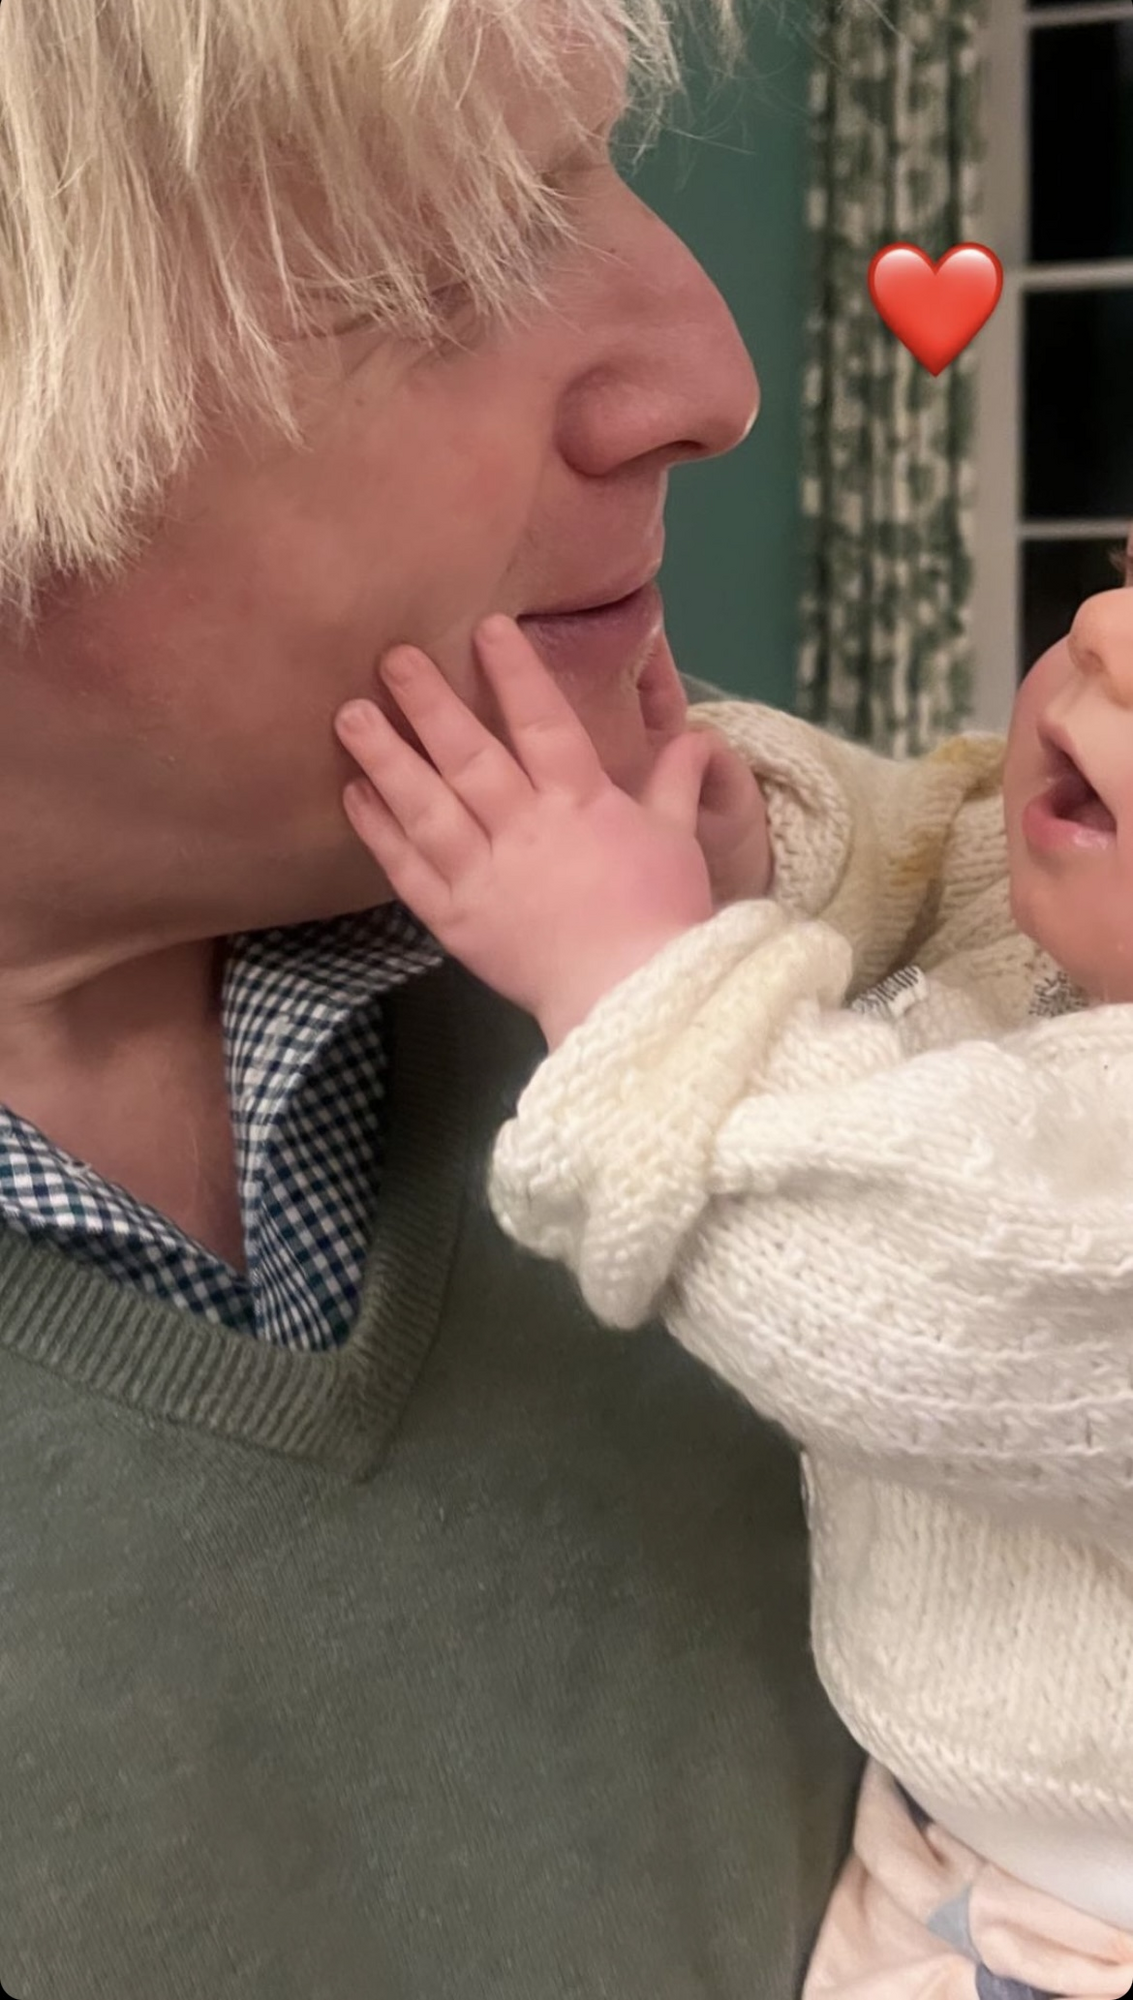 Boris Johnson's wife has documented the affectionate bond between him and their 6-month-old son: look like two peas in a pod. Photo